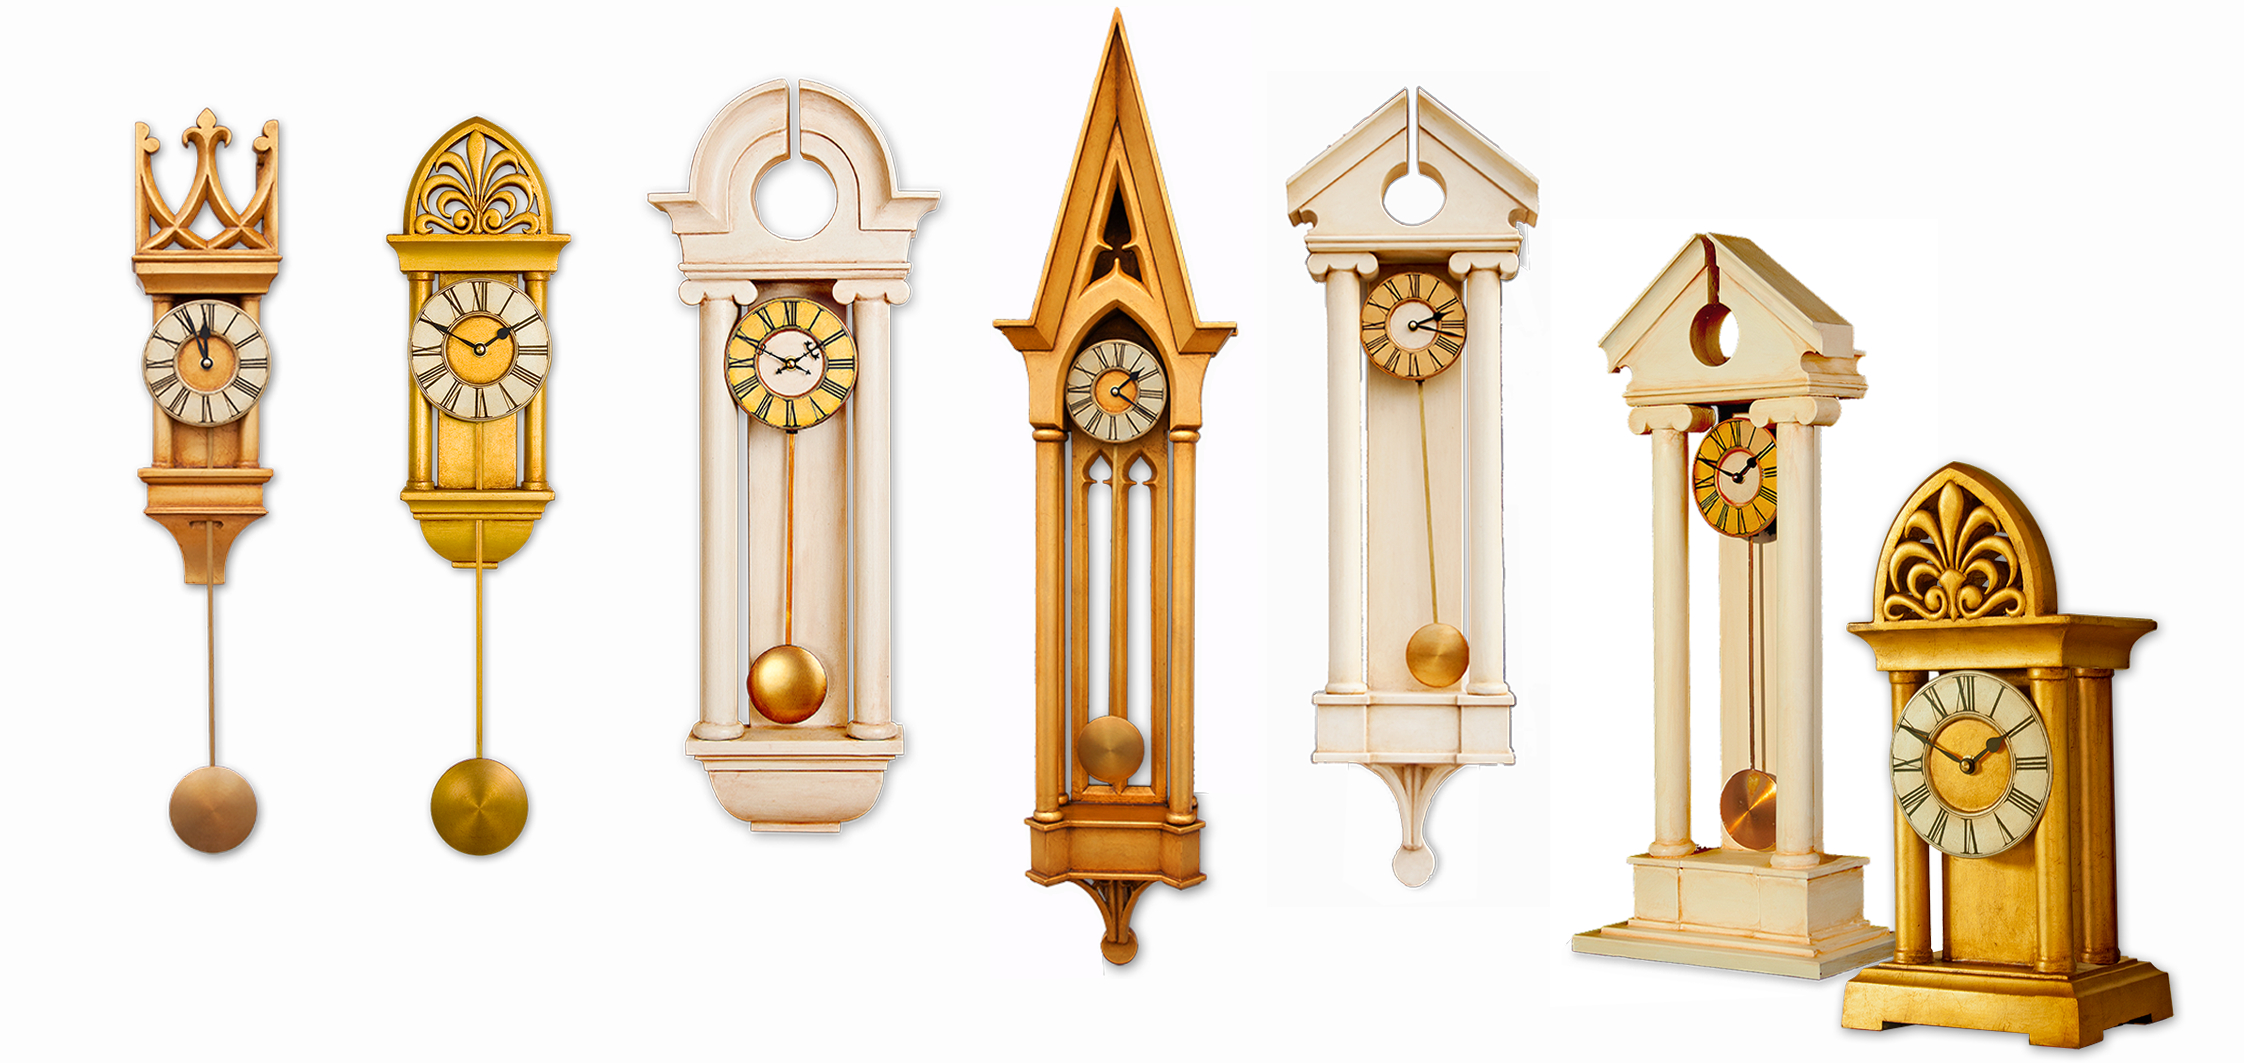 group of four wooden case column clocks with different designs and colors arranged on wooden case table